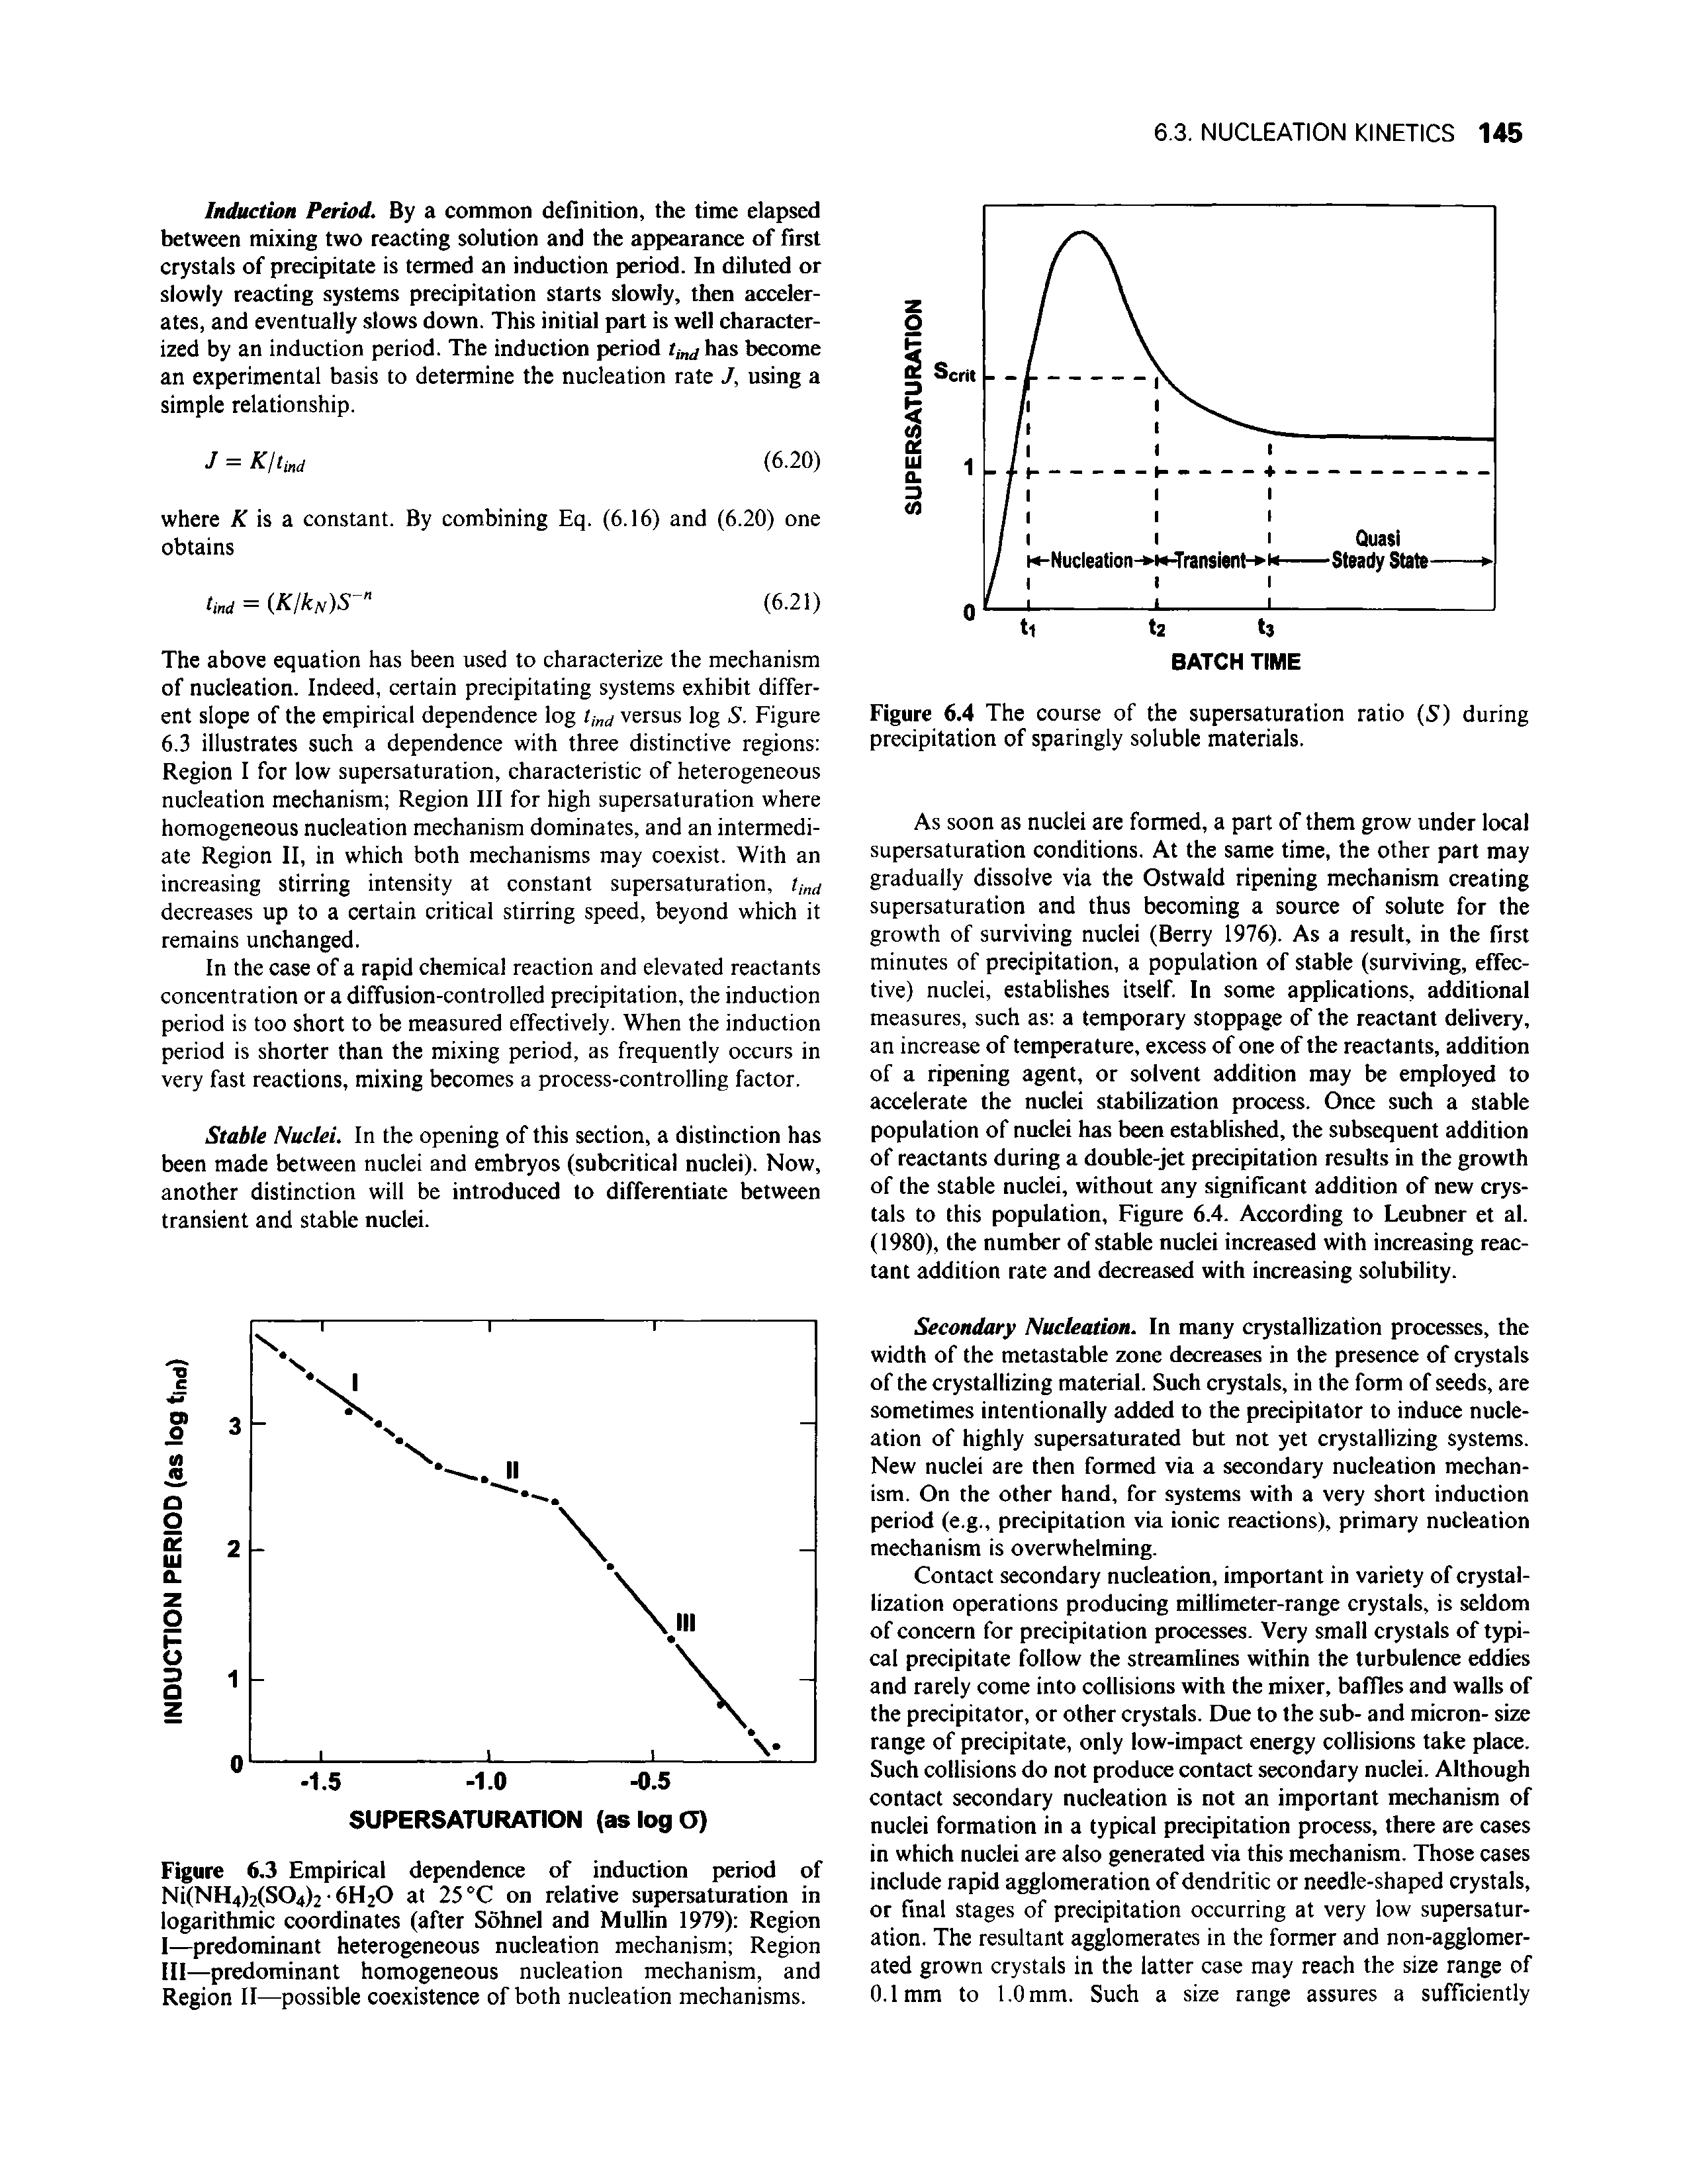 Figure 6,3 Empirical dependence of induction period of Ni(NH4)2(S04)2 6H2O at 25 °C on relative supersaturation in logarithmic coordinates (after Sohnel and Mullin 1979) Region 1—predominant heterogeneous nucleation mechanism Region III—predominant homogeneous nucleation mechanism, and Region II—possible coexistence of both nucleation mechanisms.